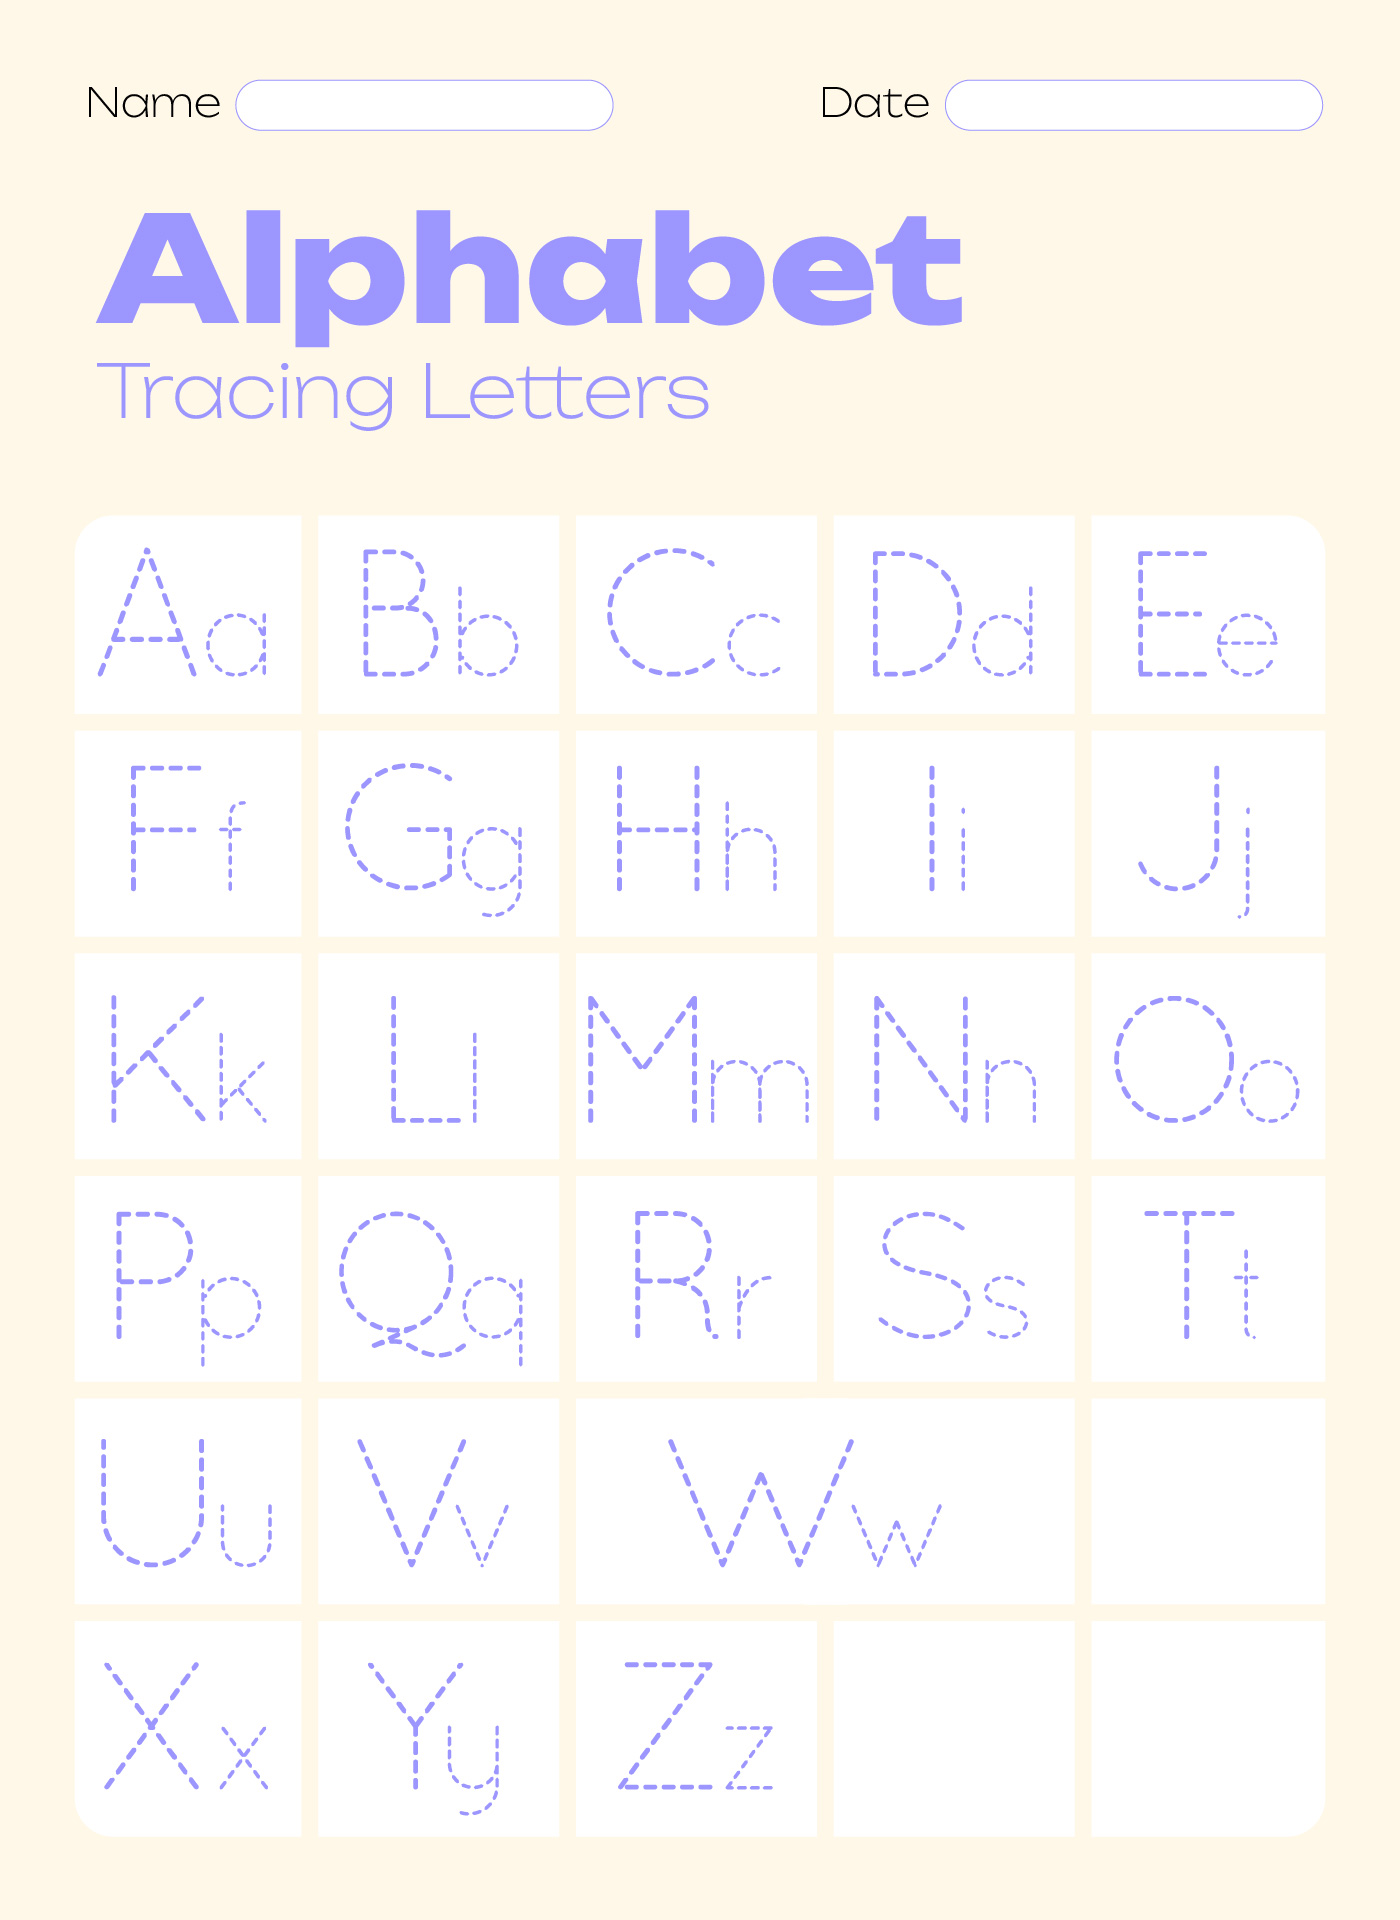 alphabet-tracing-worksheets-a-z-free-printable-for-kids-123-kids-fun